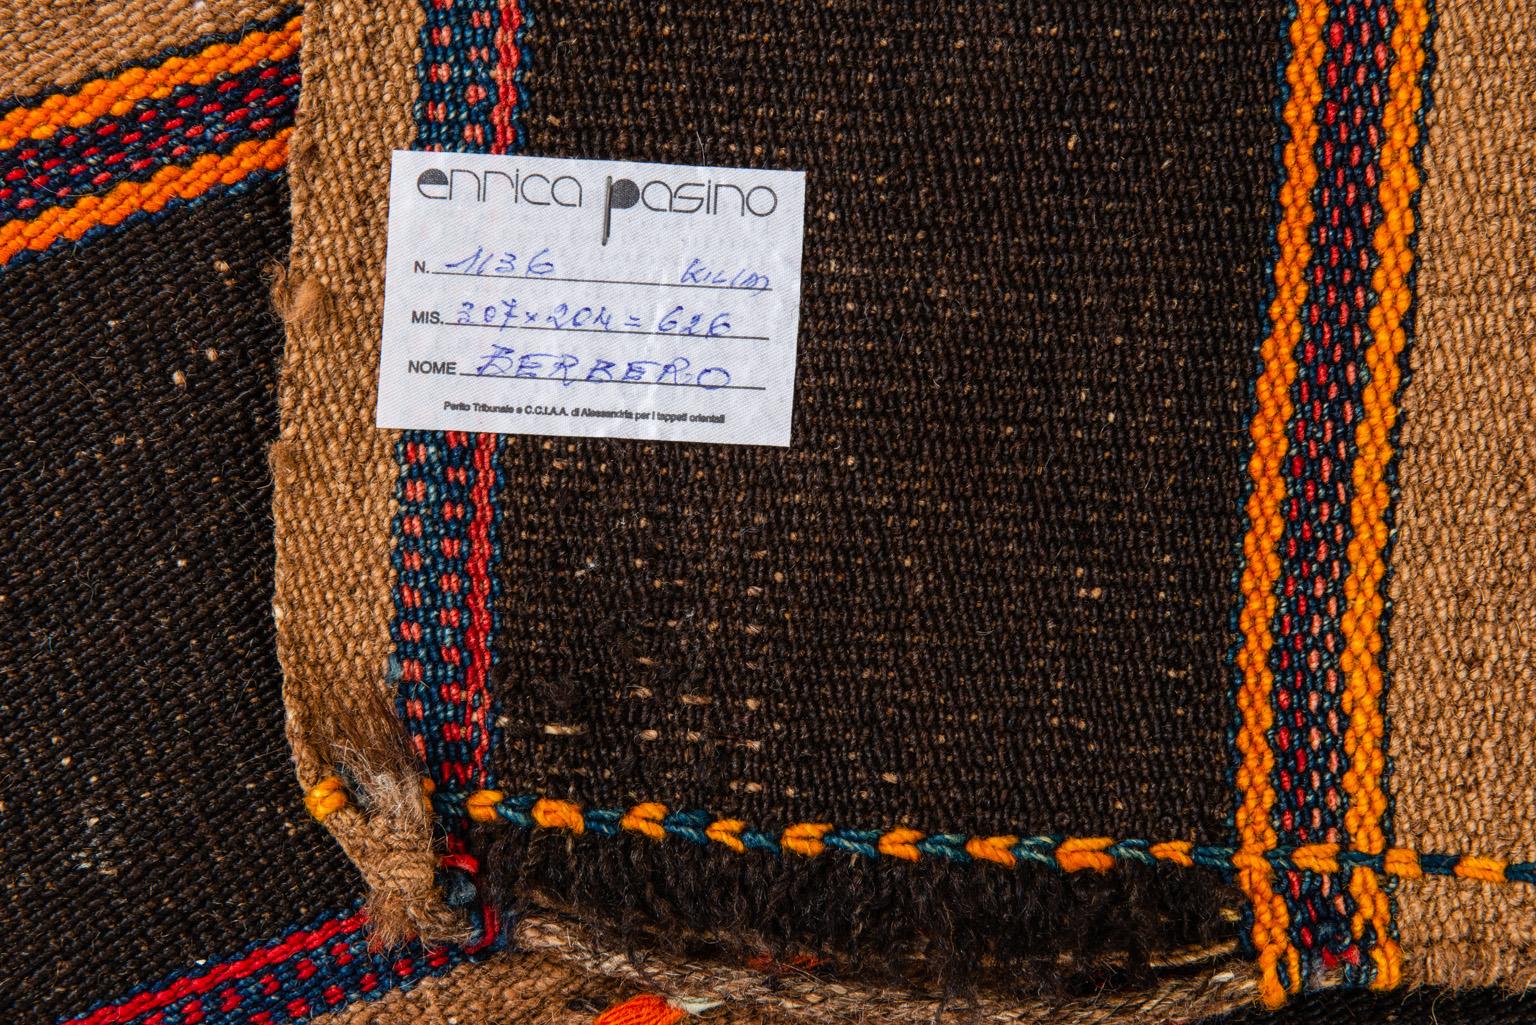 Berber old carpet found and bought (with another one) in an oasis during a travel that I made in desert many years ago. It was in my private collection, to remember me that adventure in desert. It has been carefully washed.
Placed side by side with